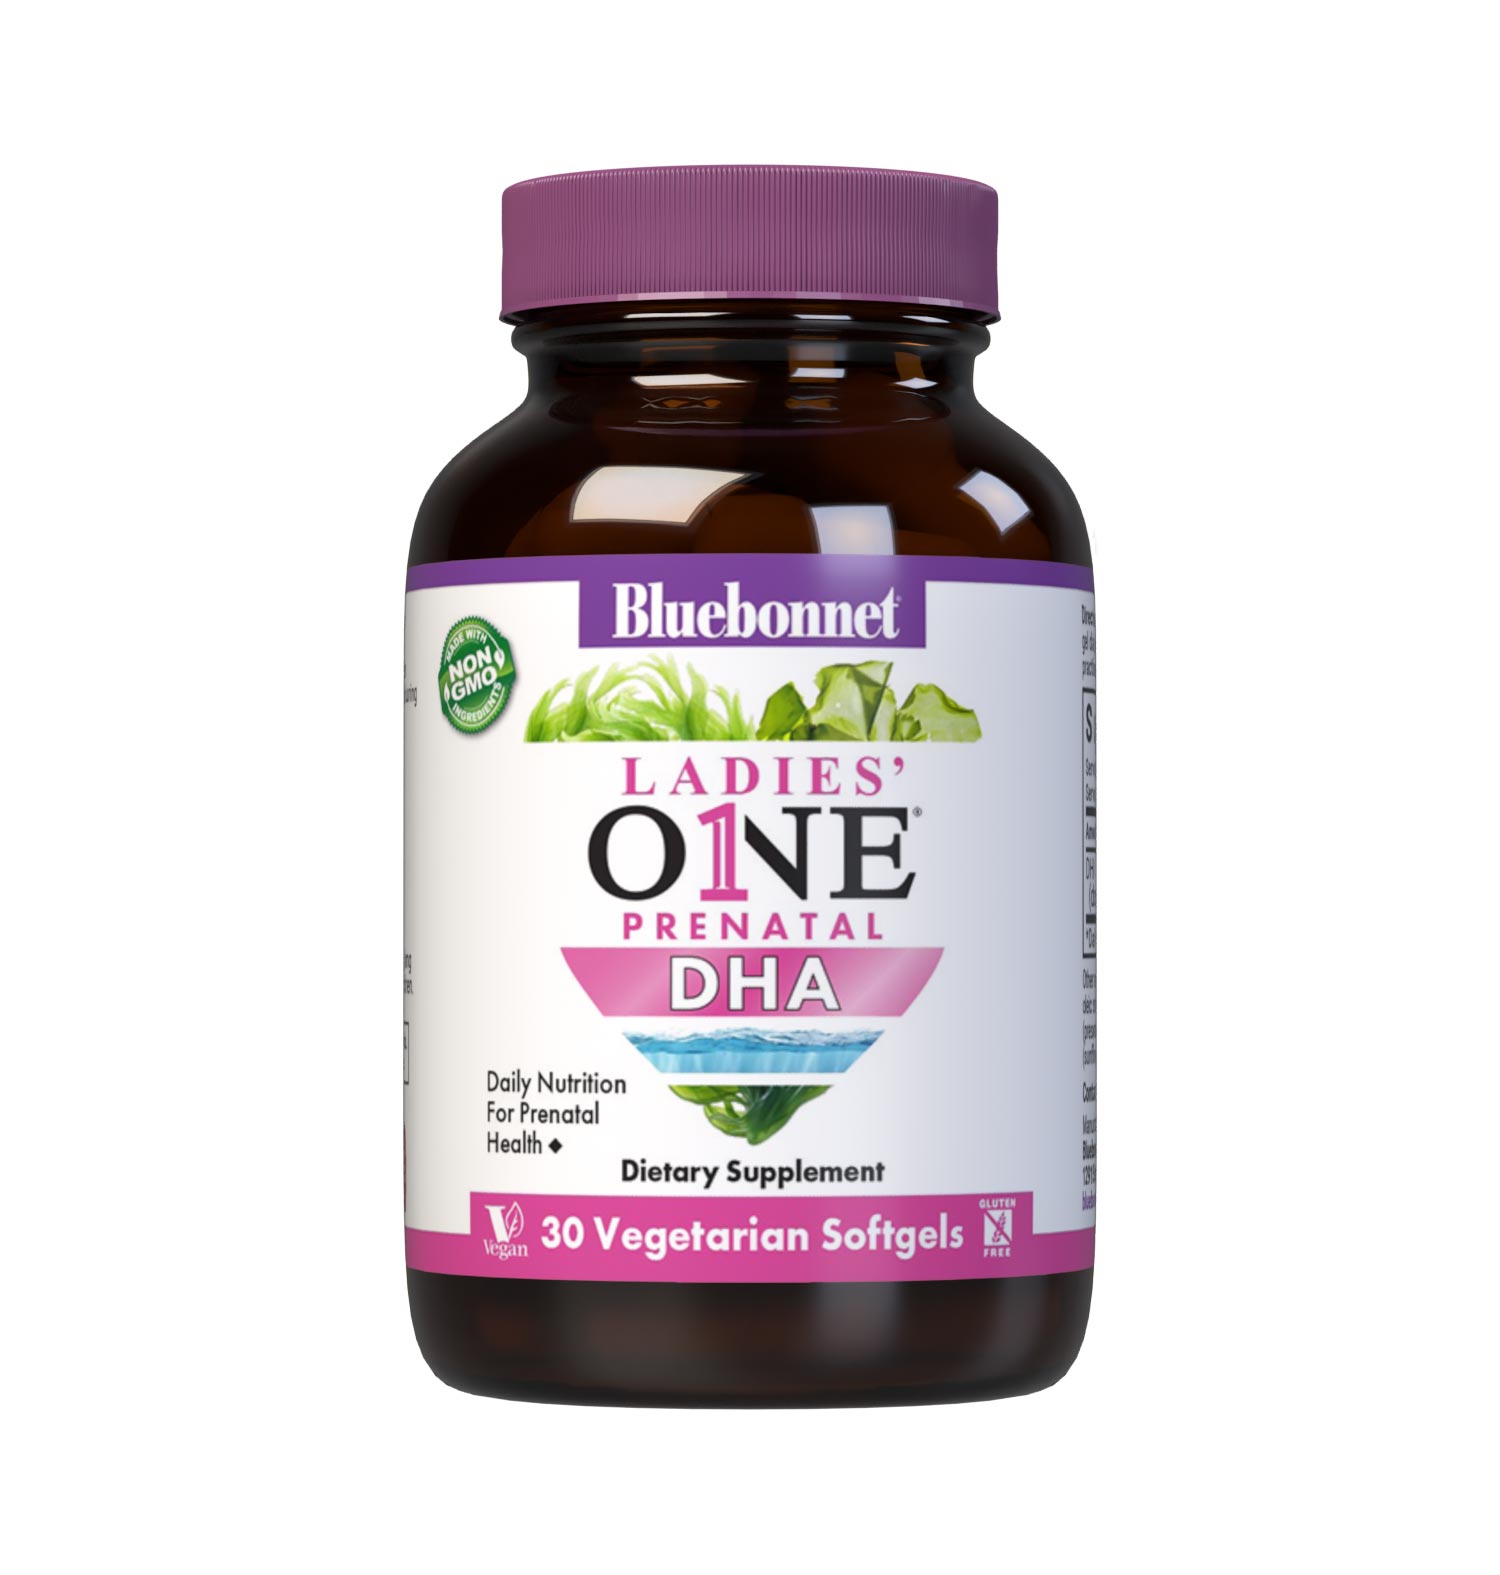 Bluebonnet's Ladies' One Prenatal DHA is formulated with life’sDHA®, a vegetable-based docosahexaenoic acid (DHA) in a triglyceride form derived from marine algae. Life’sDHA® is a complement to any woman’s diet during pregnancy and/or lactation. #size_ 30 count